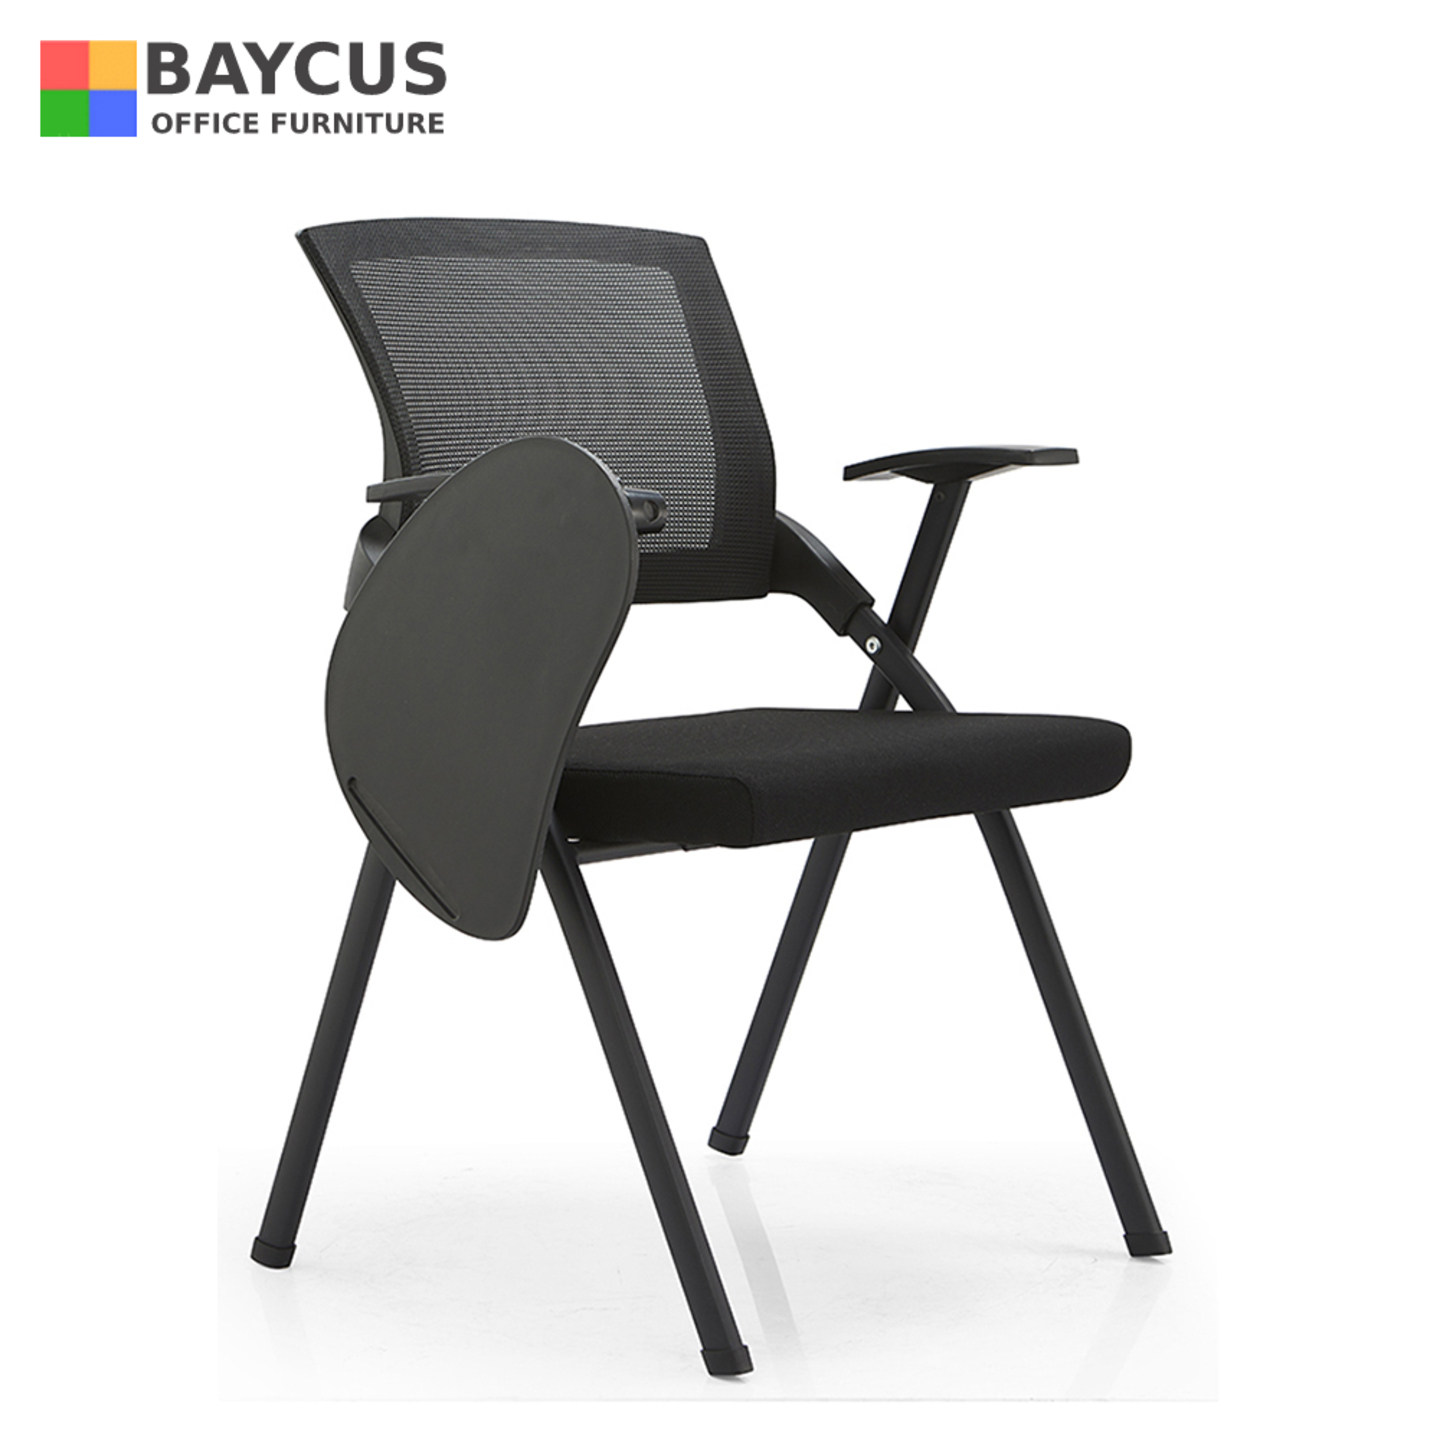 XD220 Foldable Training Chair with Tablet